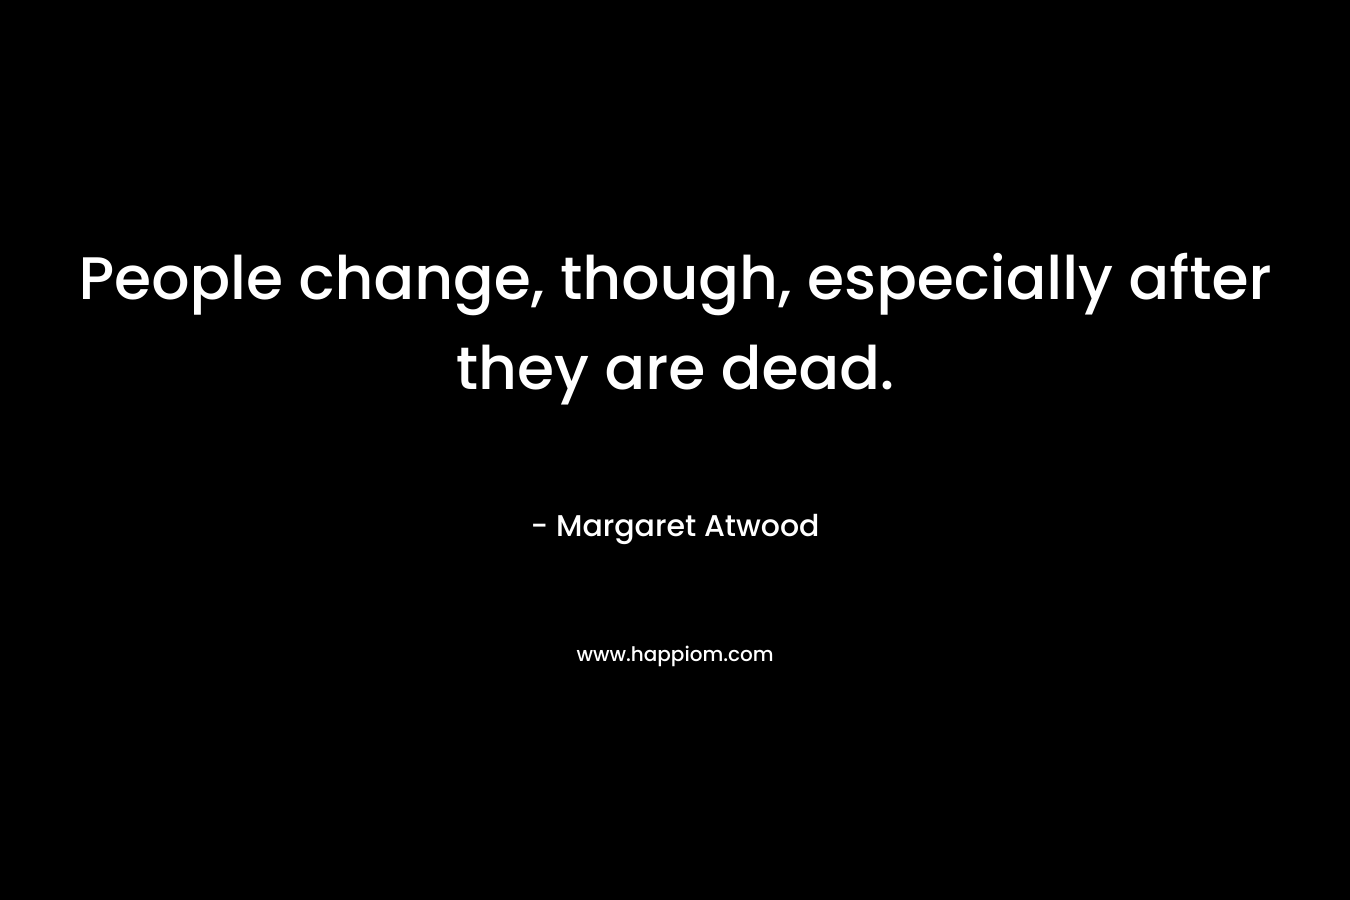 People change, though, especially after they are dead.